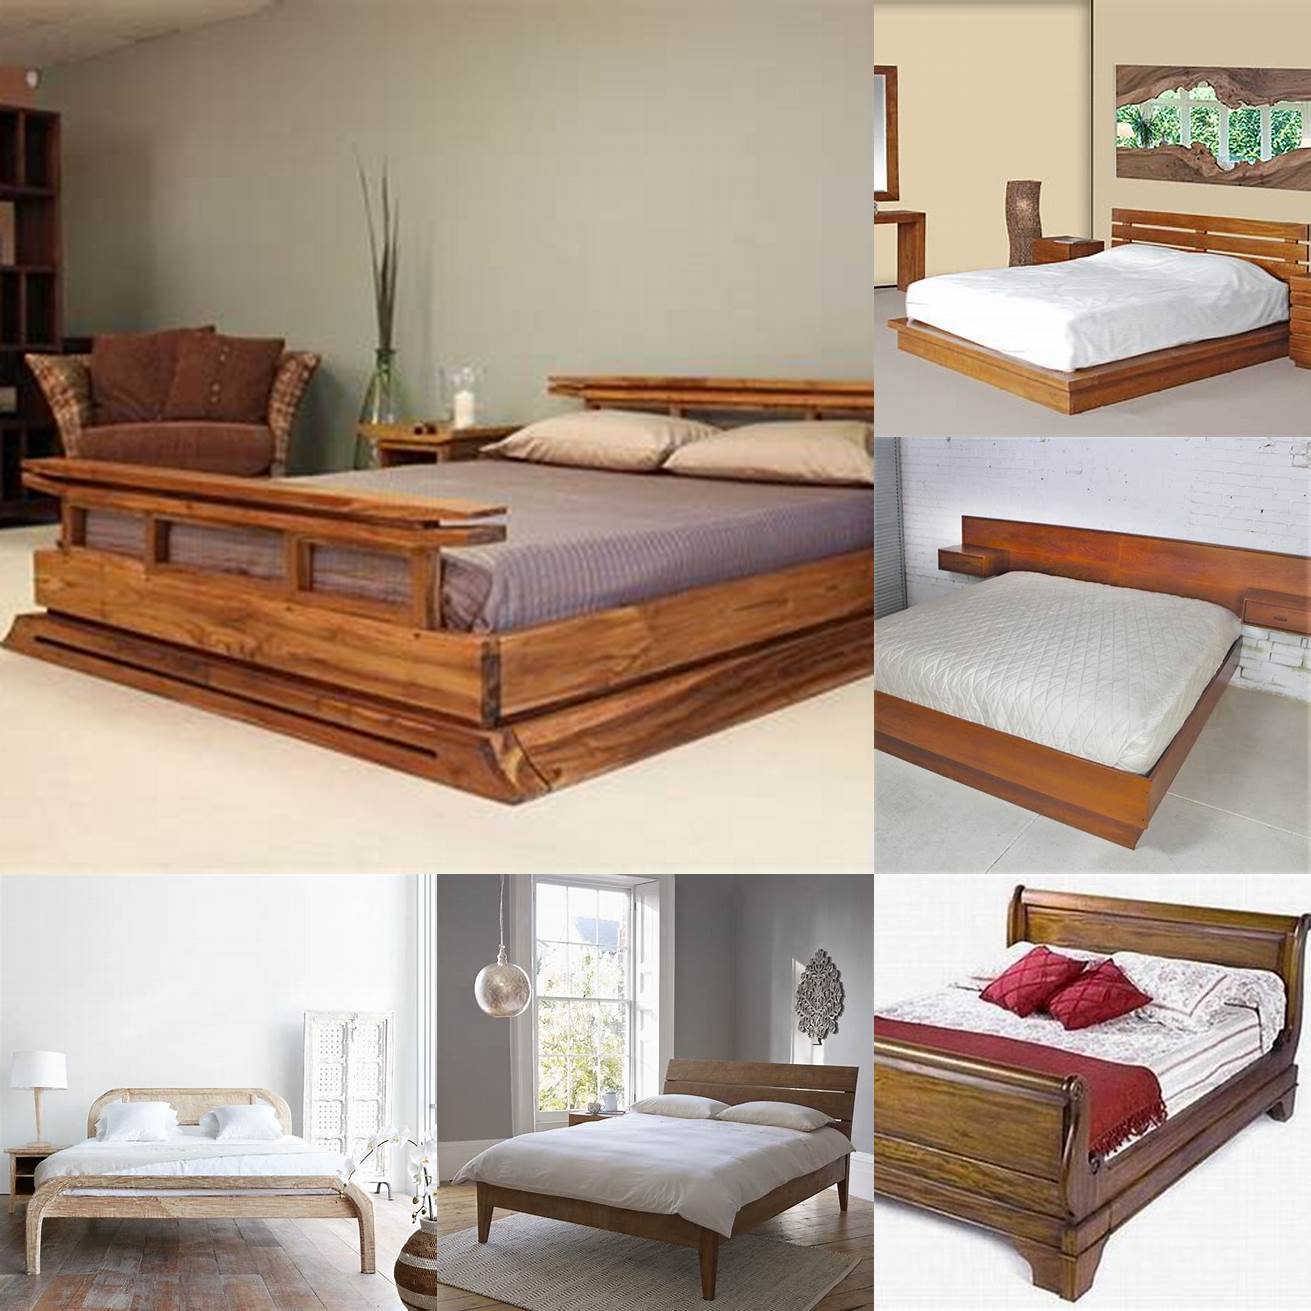 A traditional bedroom with a Java teak bed frame